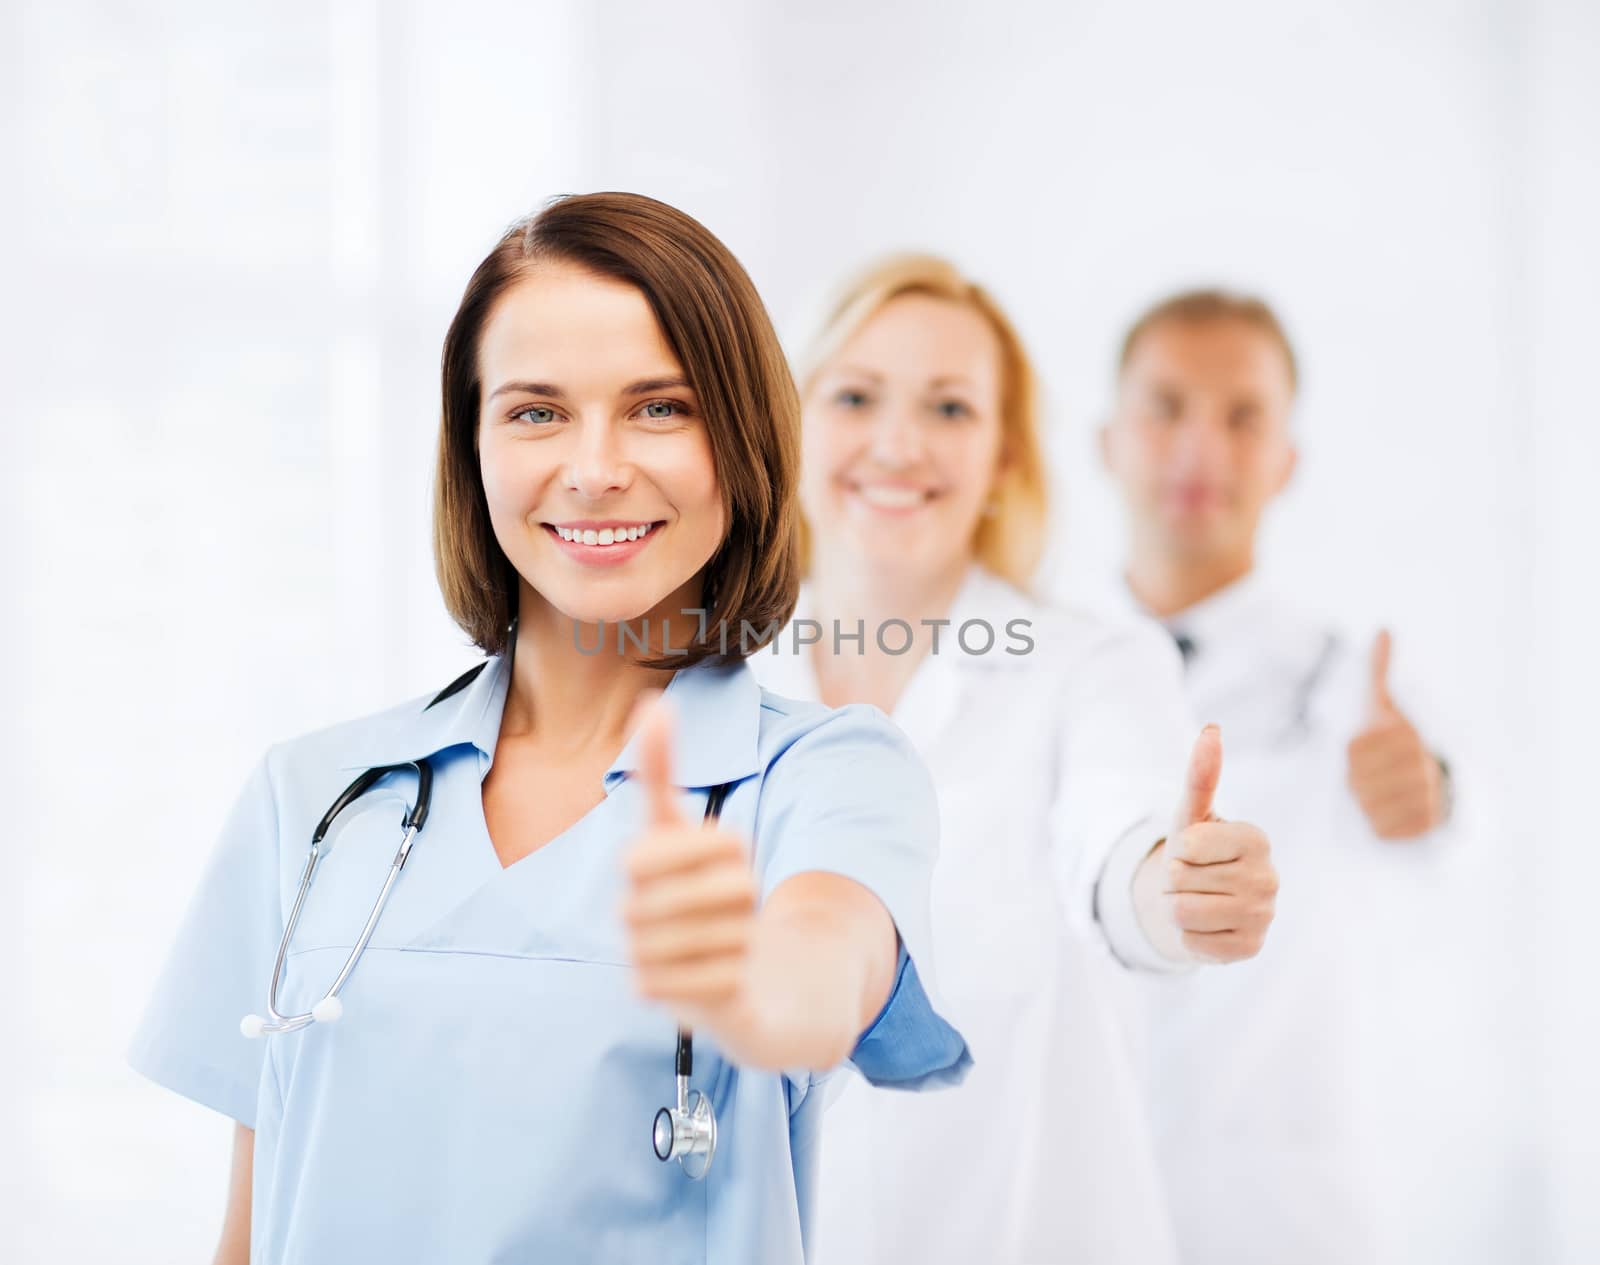 team of doctors showing thumbs up by dolgachov